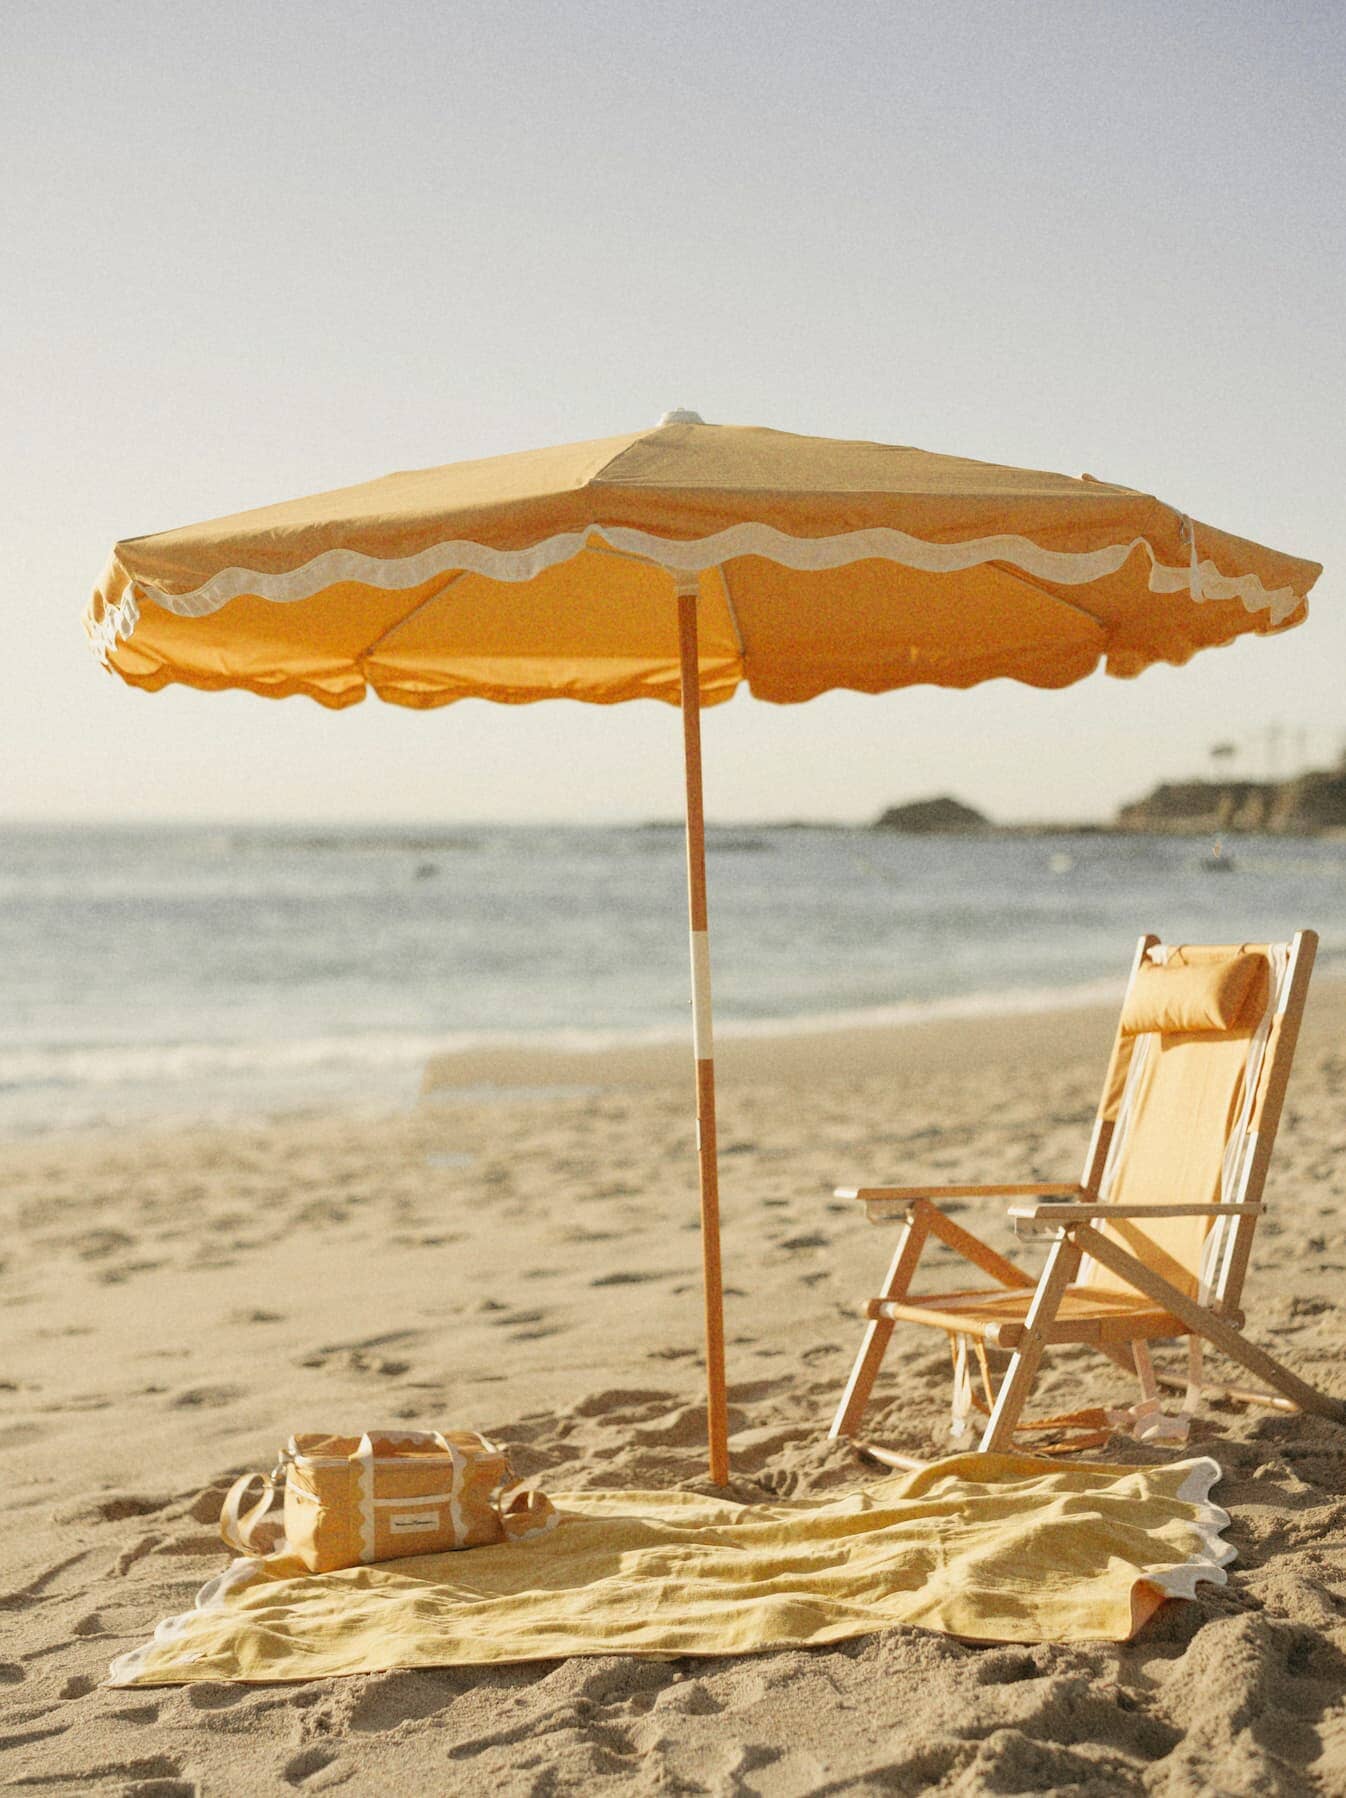 Beach setting with Riviera mimosa umbrella, chair, towel & cooler